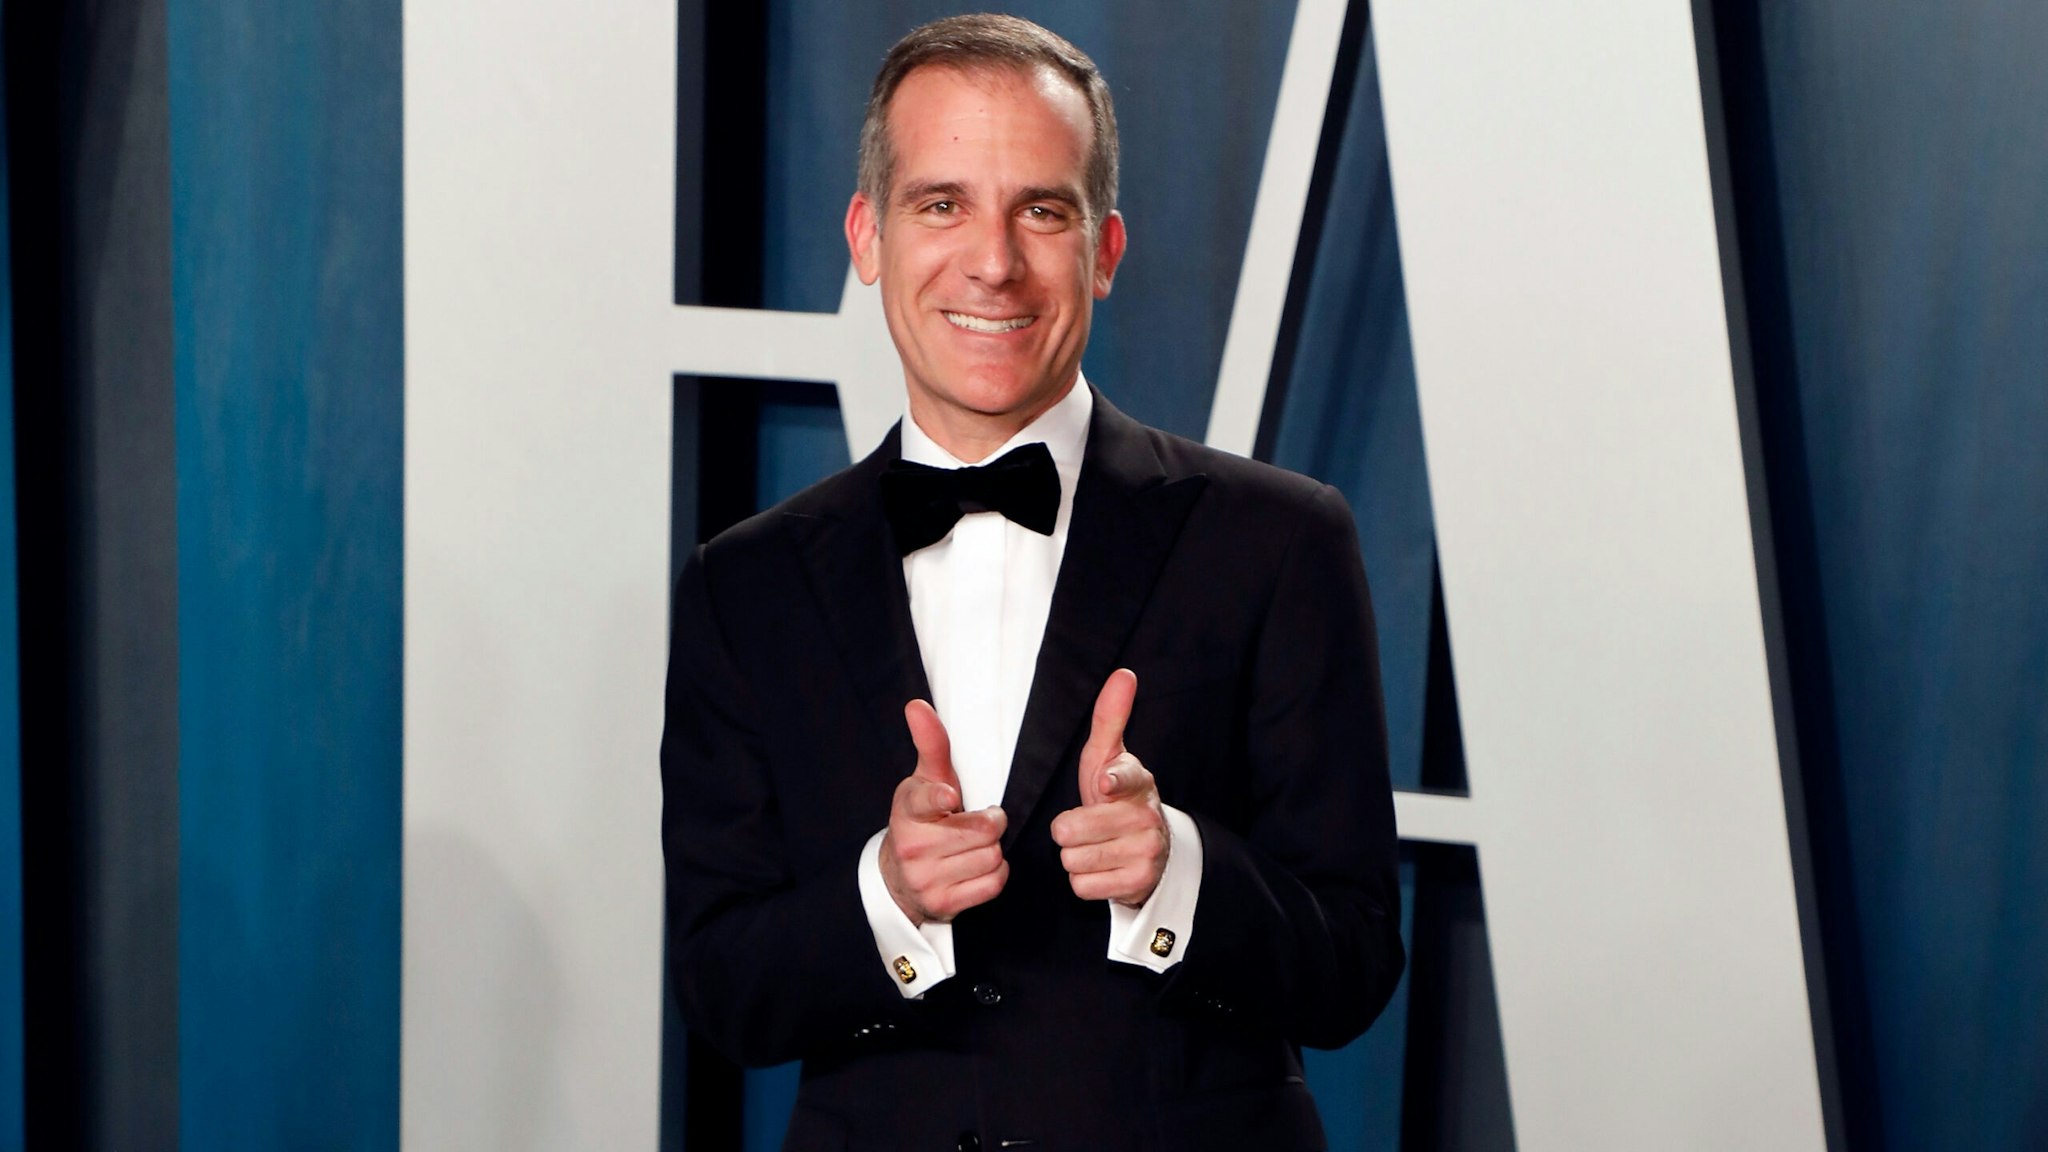 BEVERLY HILLS, CALIFORNIA - FEBRUARY 09: Los Angeles Mayor Eric Garcetti attends the 2020 Vanity Fair Oscar Party at Wallis Annenberg Center for the Performing Arts on February 09, 2020 in Beverly Hills, California.